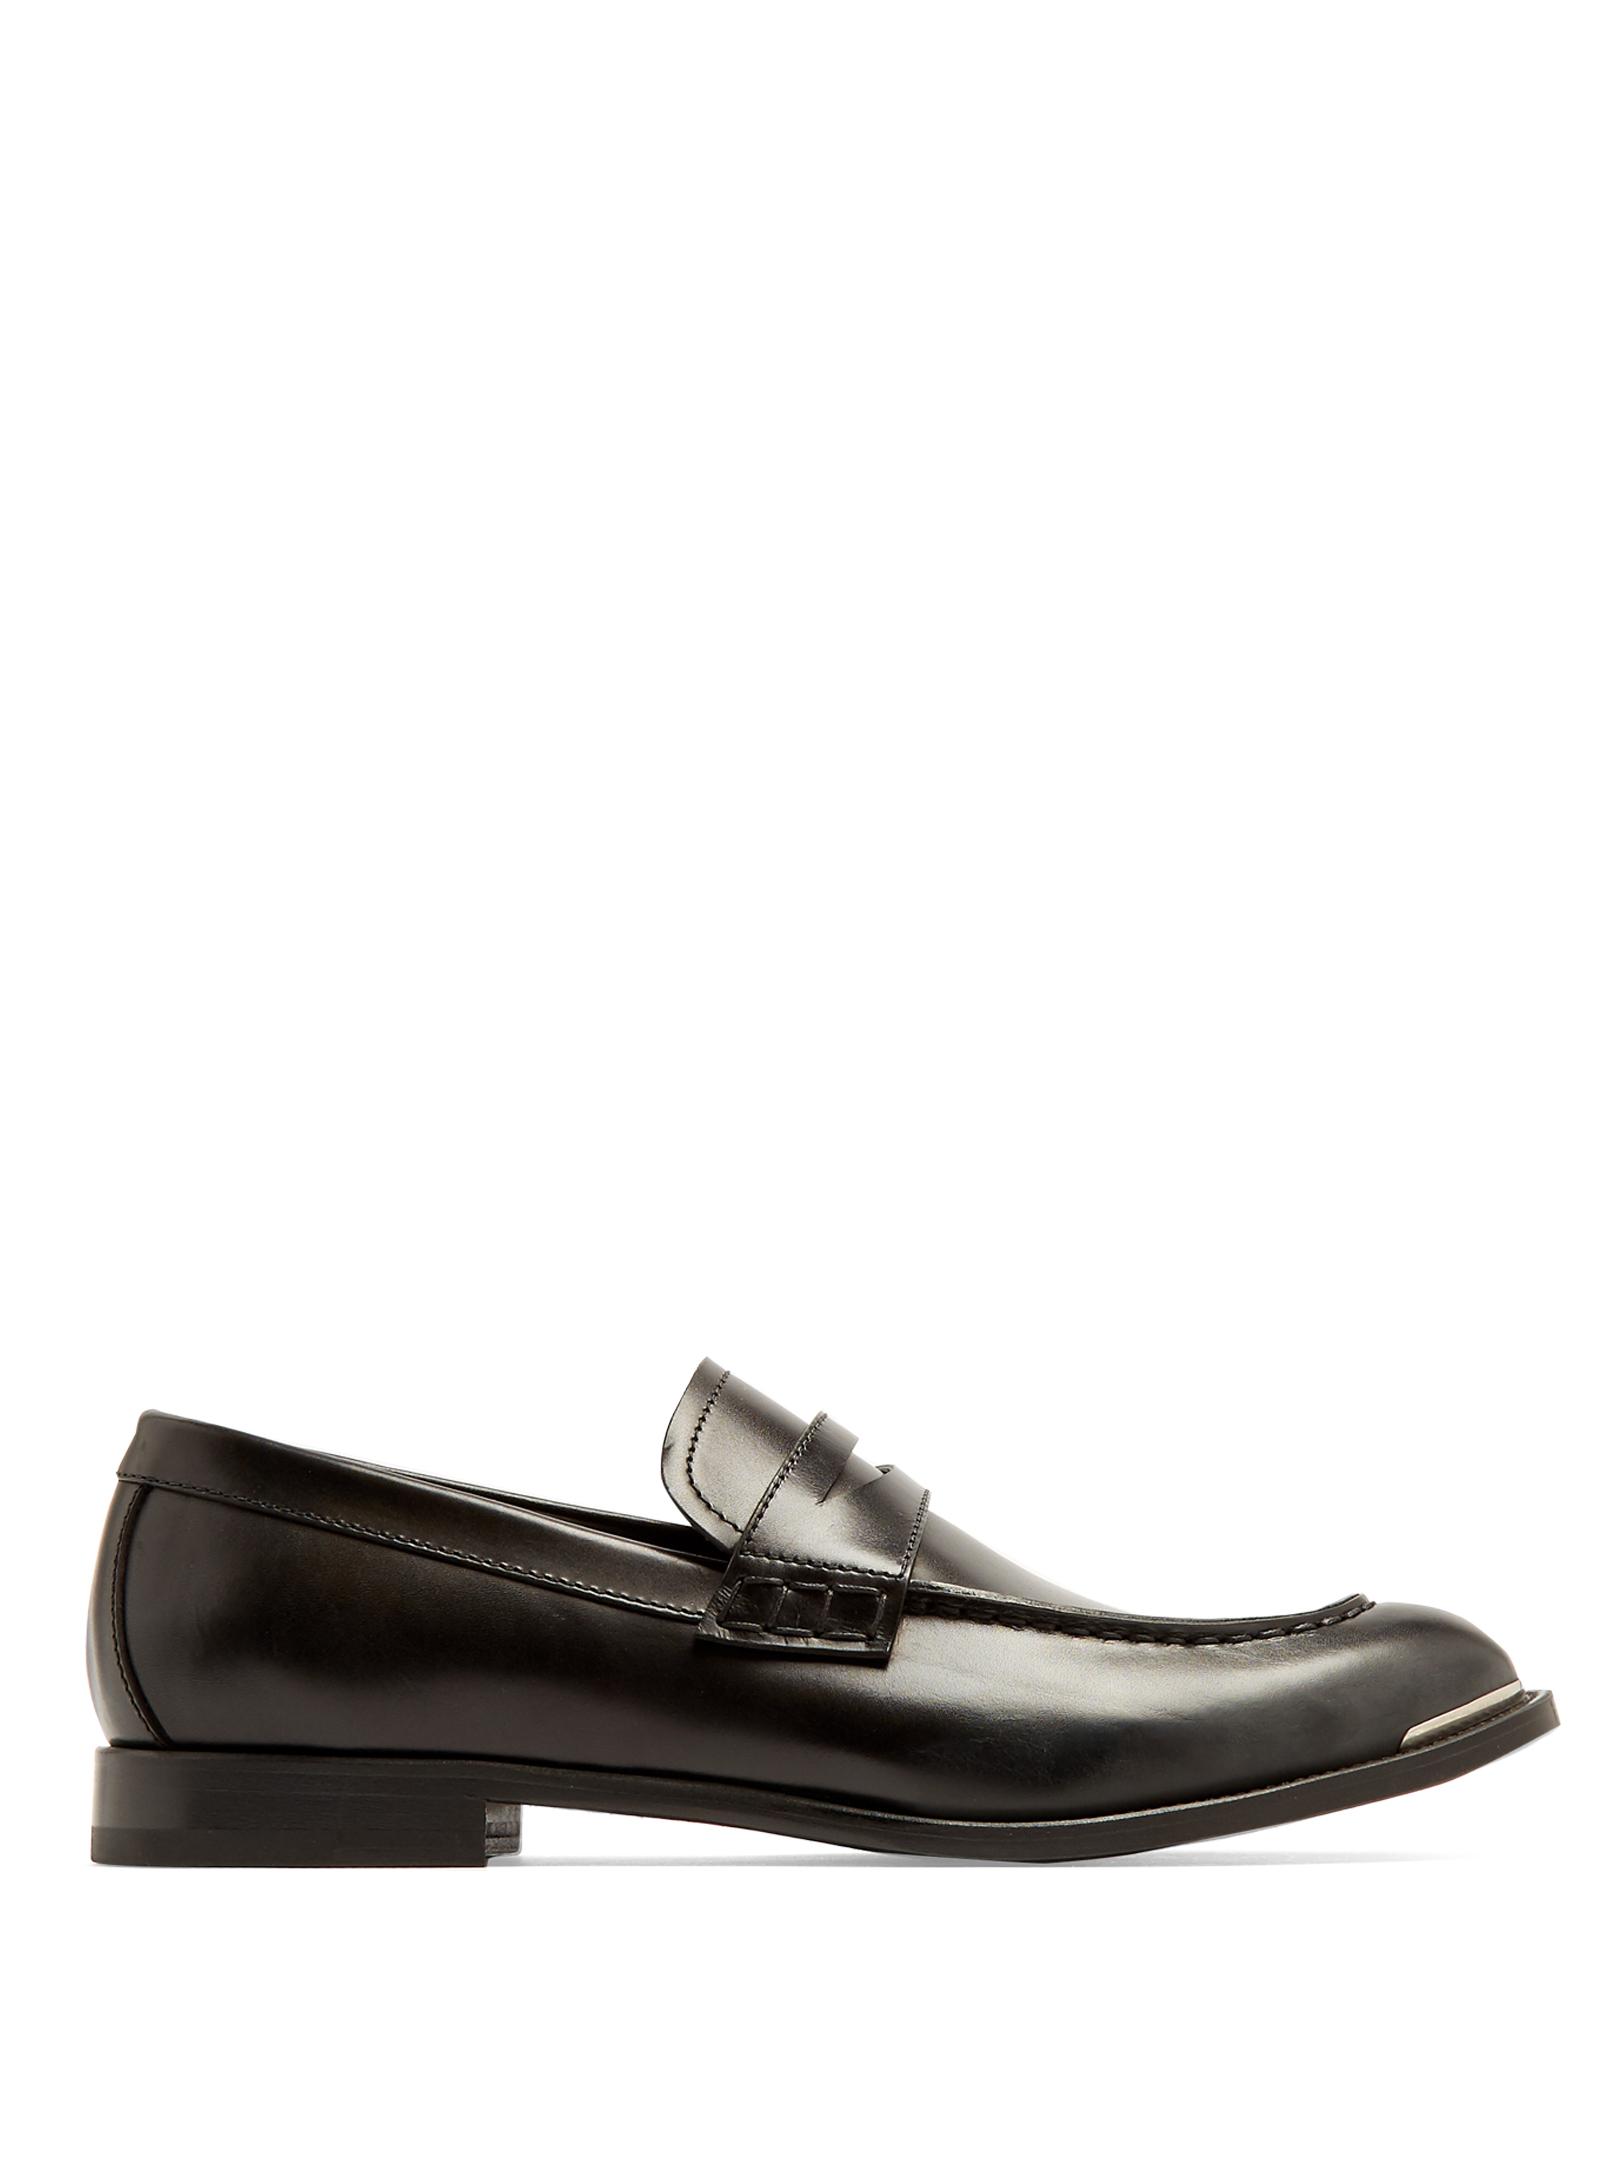 Alexander McQueen Leather Penny Loafers in Black for Men - Lyst